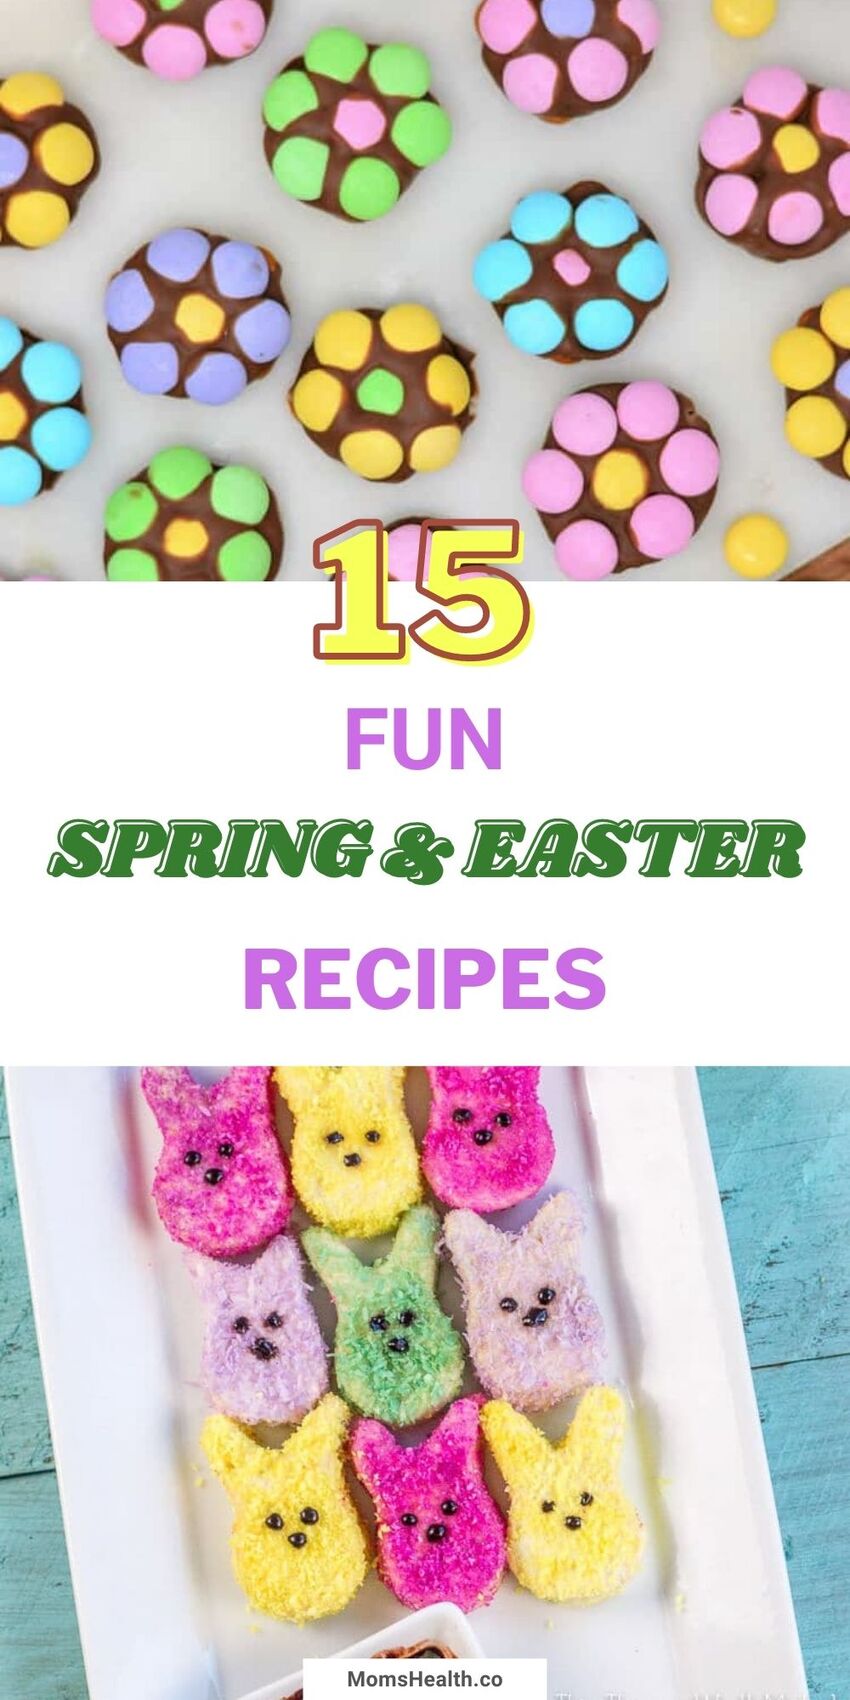 Easter recipes for kids - 15 recipes that are fun and delicious